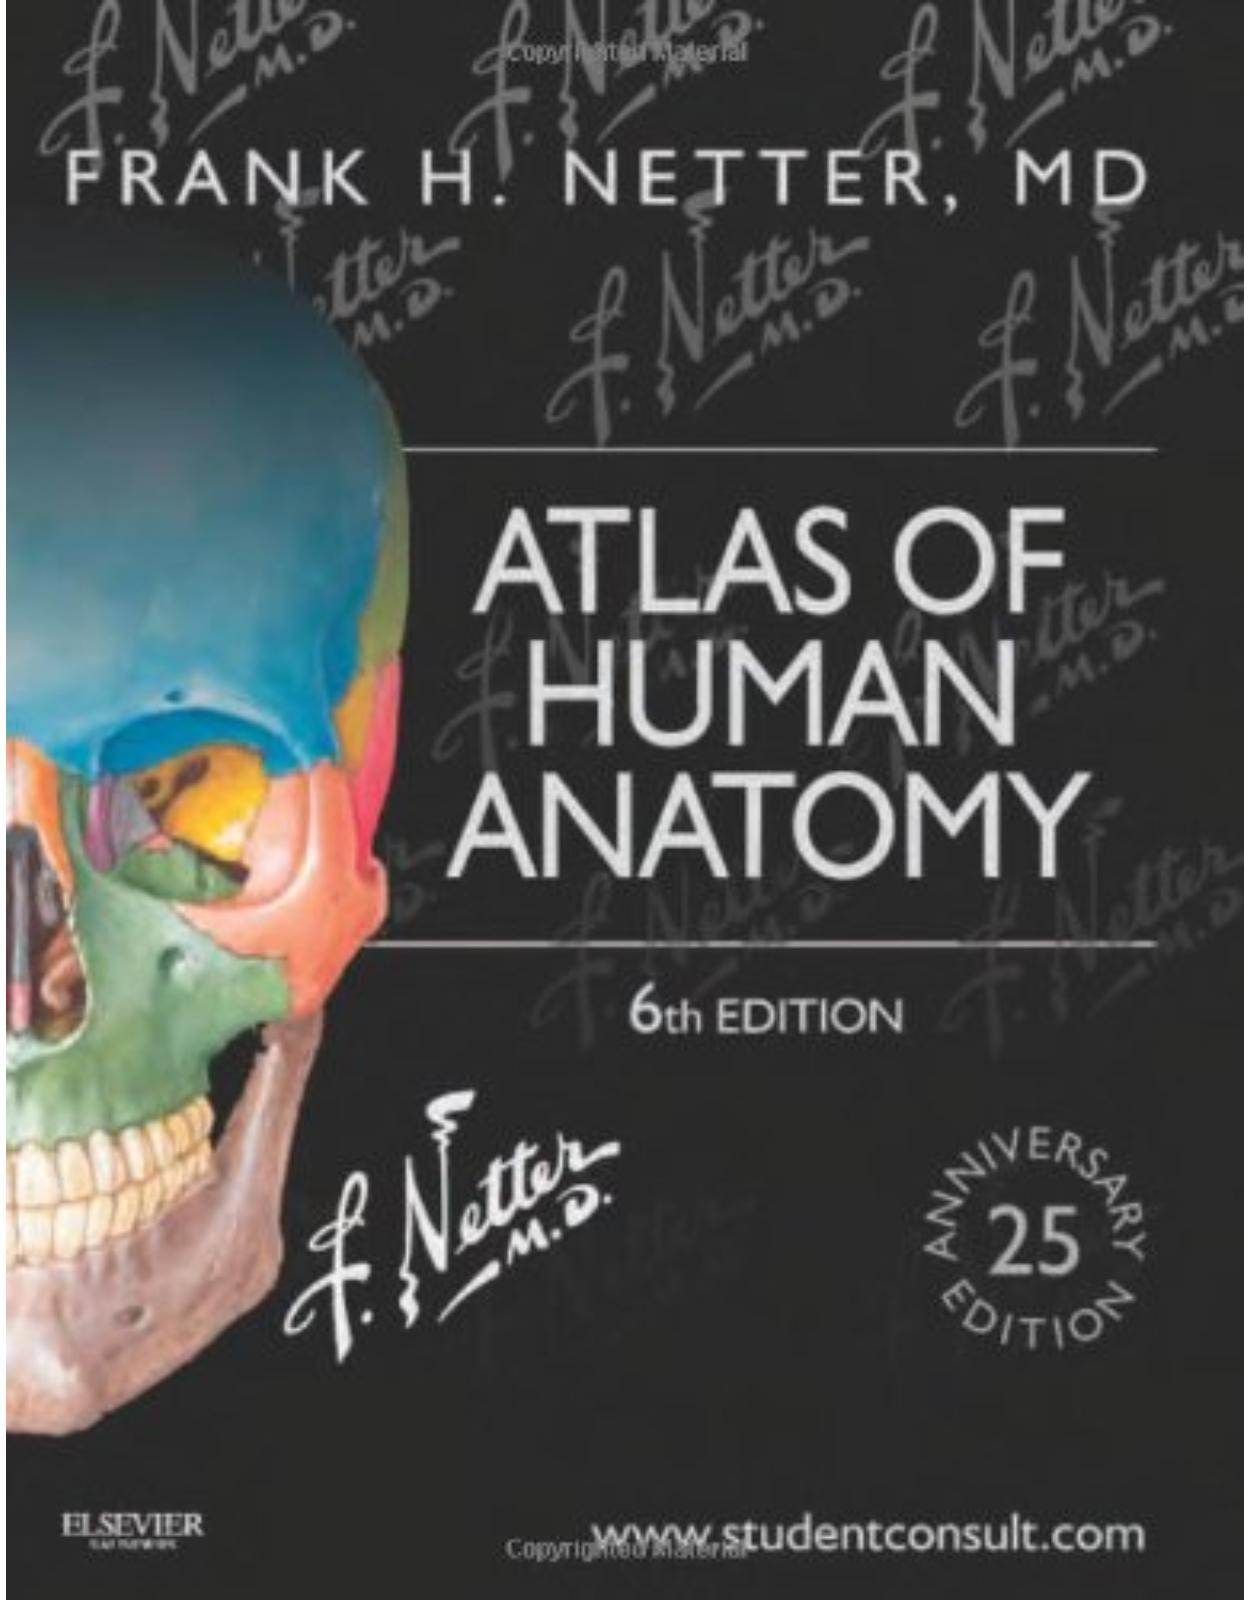 Netter Atlas of Human Anatomy: Including StudentConsult Interactive Ancillaries and Guides, 6e